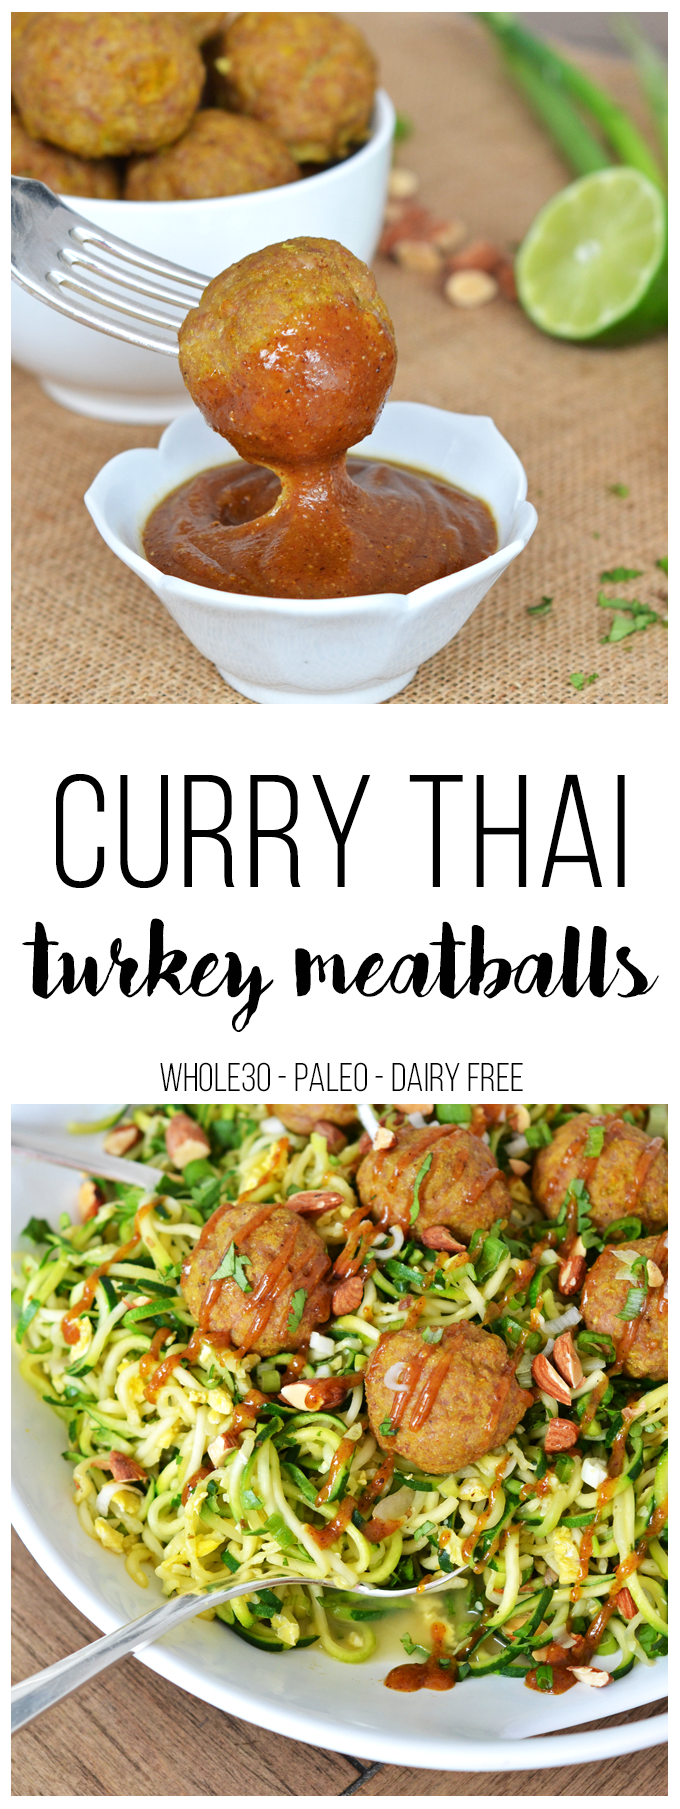 These Curry Thai Turkey Meatballs are super easy to throw together, Whole30, Paleo and packed with flavor and protein. A quick curry and almond butter sauce compliment them perfectly!